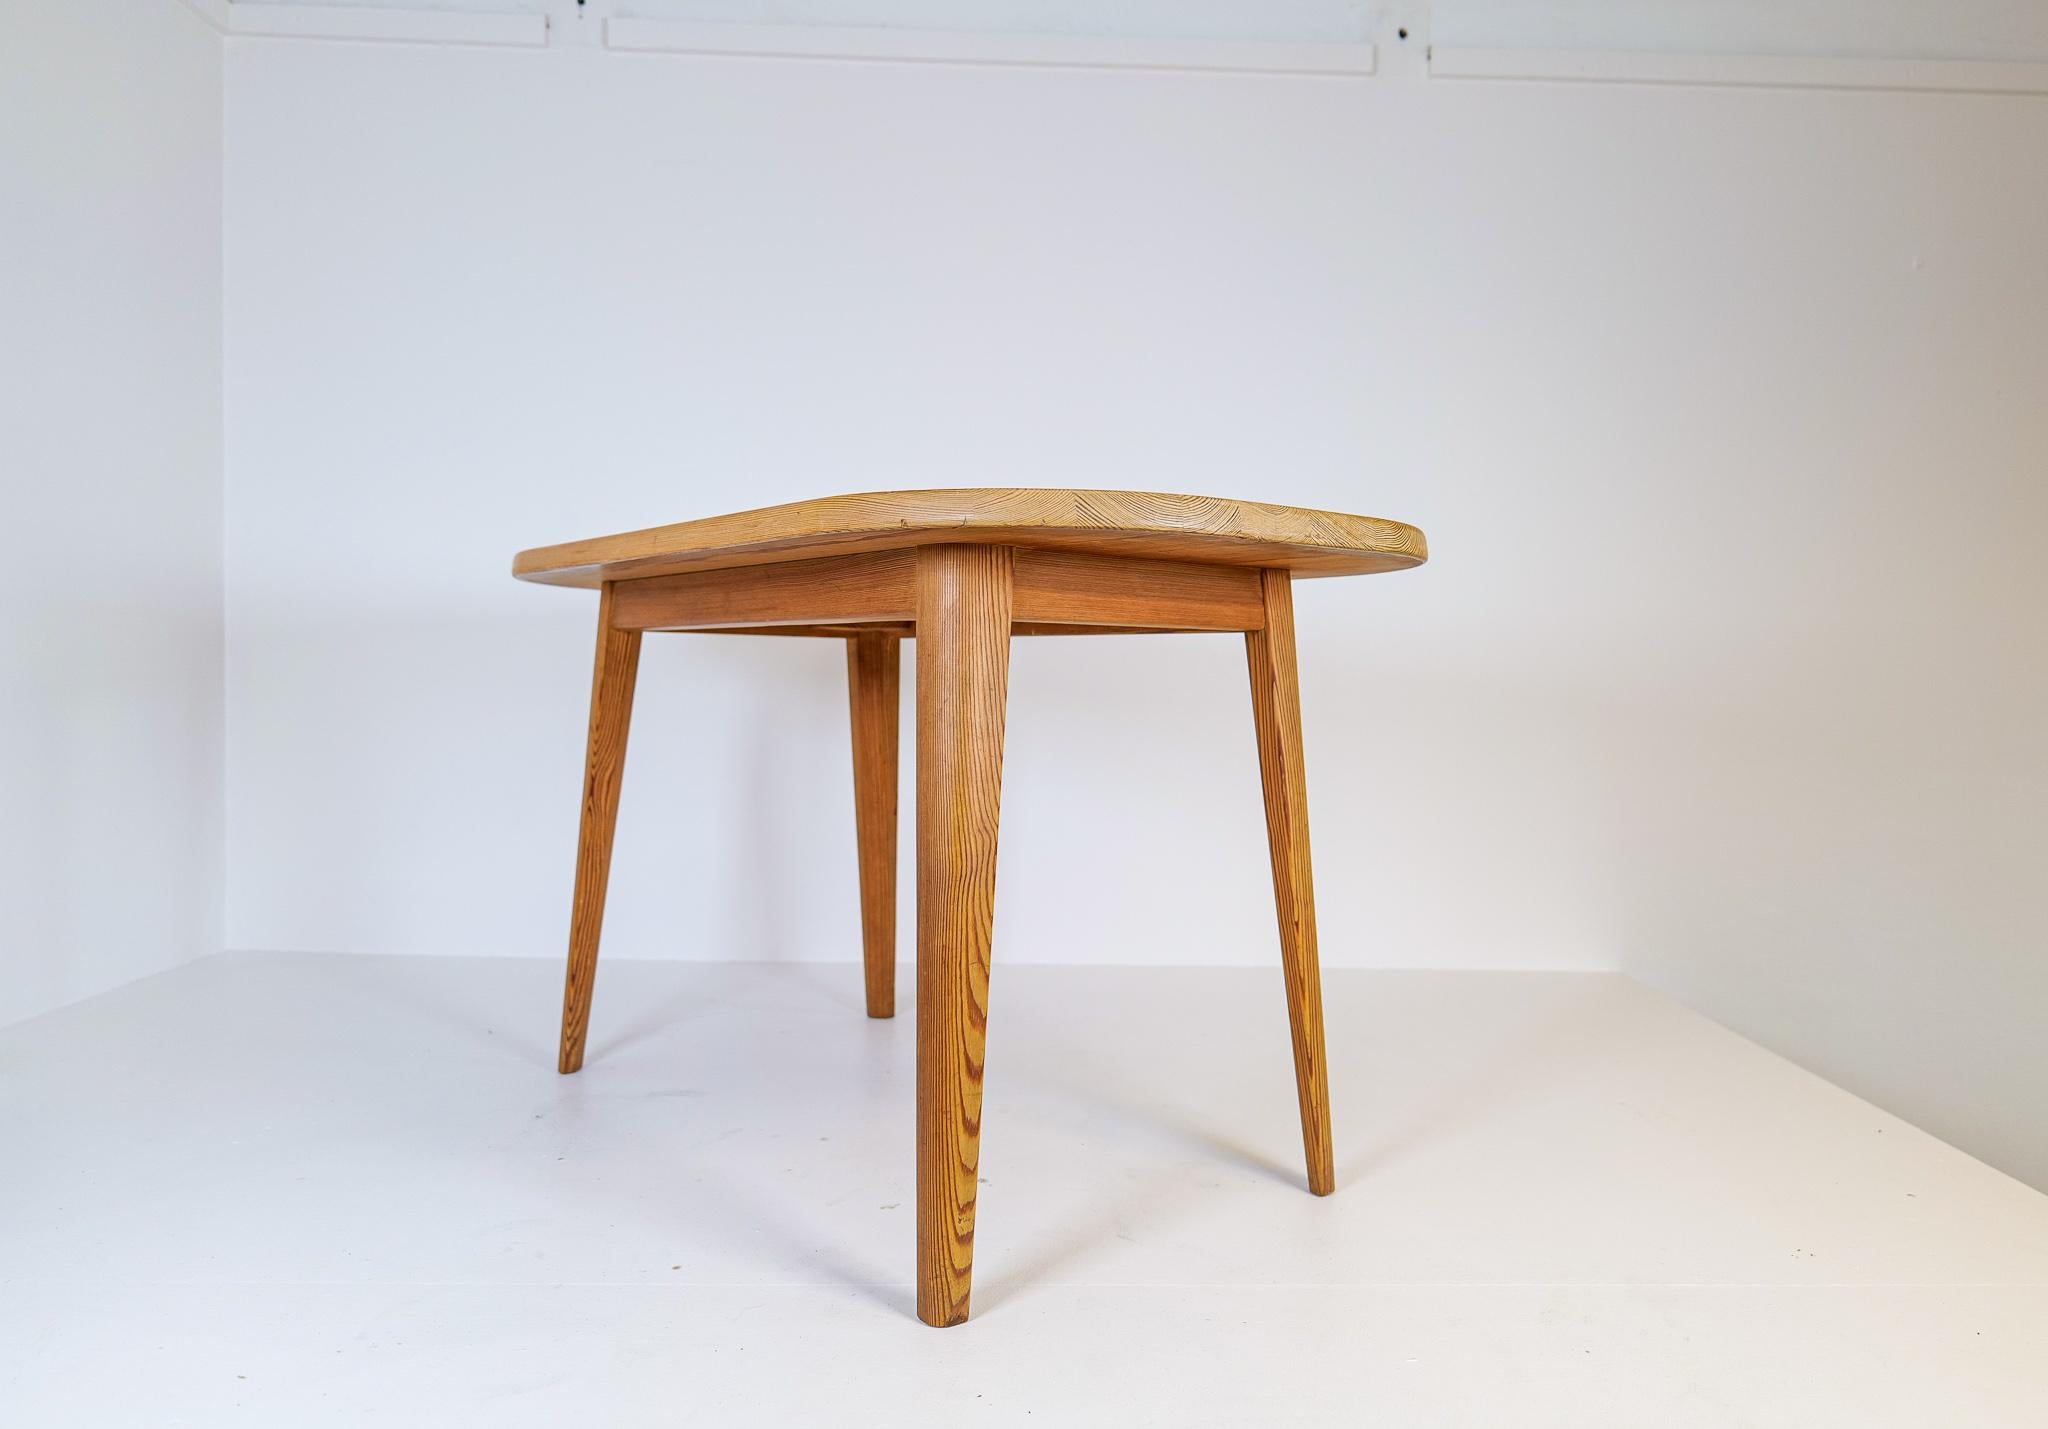 Midcentury Pine Coffee Table by Carl Malmsten, Sweden, 1940s For Sale 3